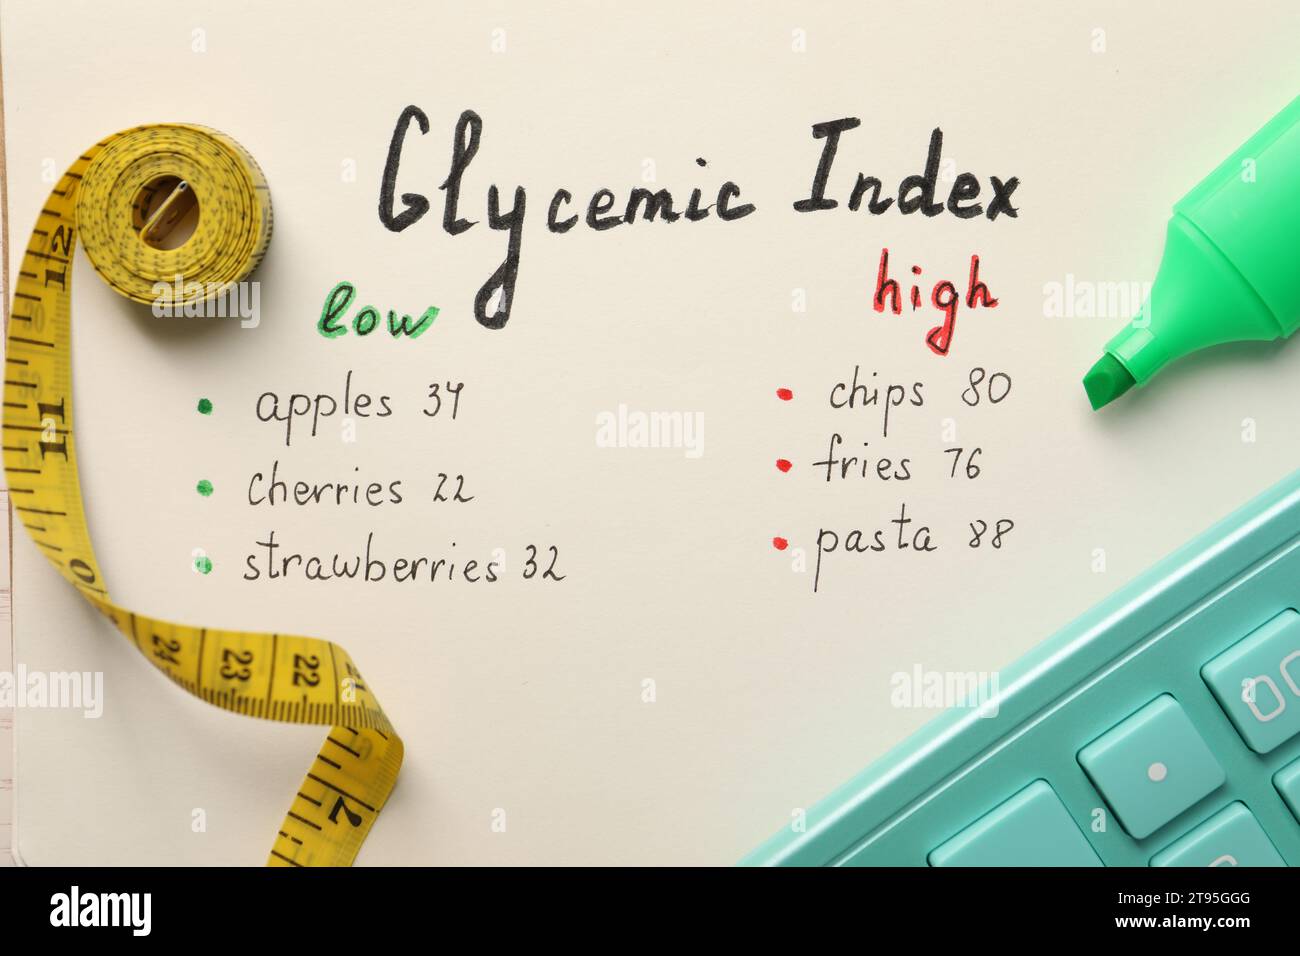 List with products of low and high glycemic index, marker, measuring tape and calculator, top view Stock Photo